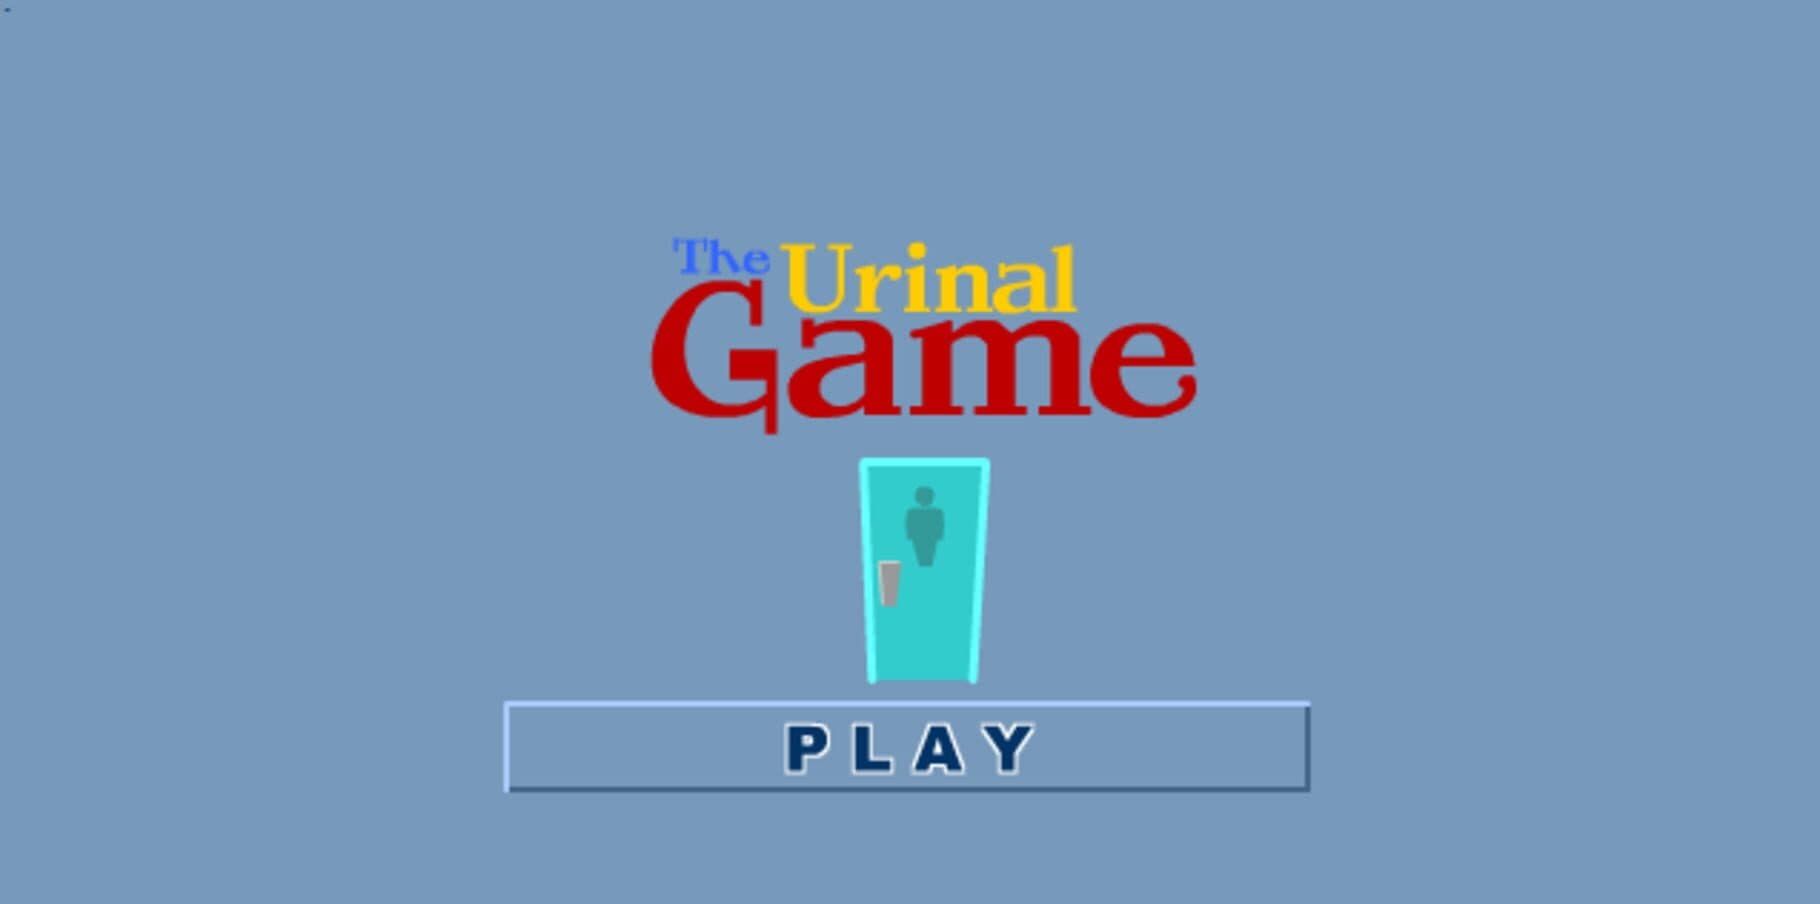 The Urinal Game cover art